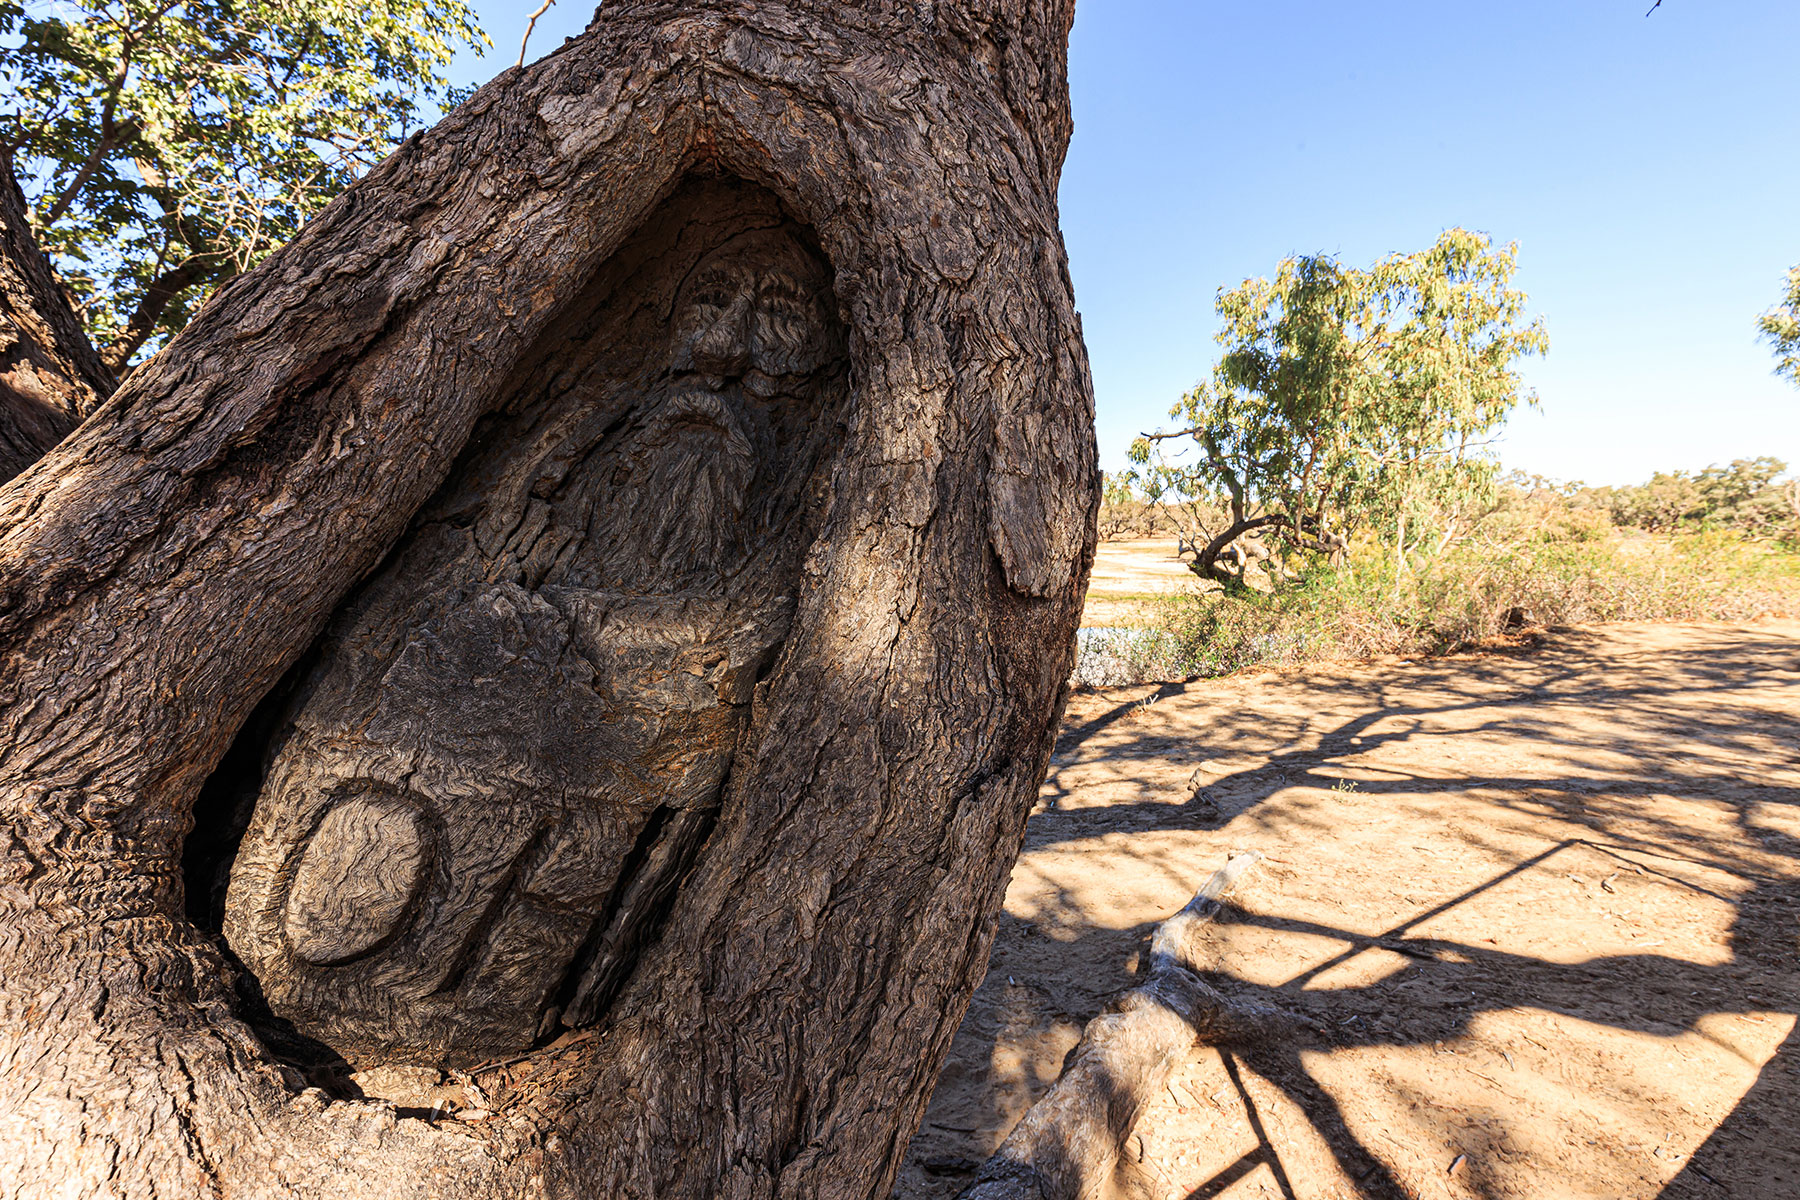 John Dick carved Burke's face into this tree in 1898, about 30 metres downstream of the Dig Tree